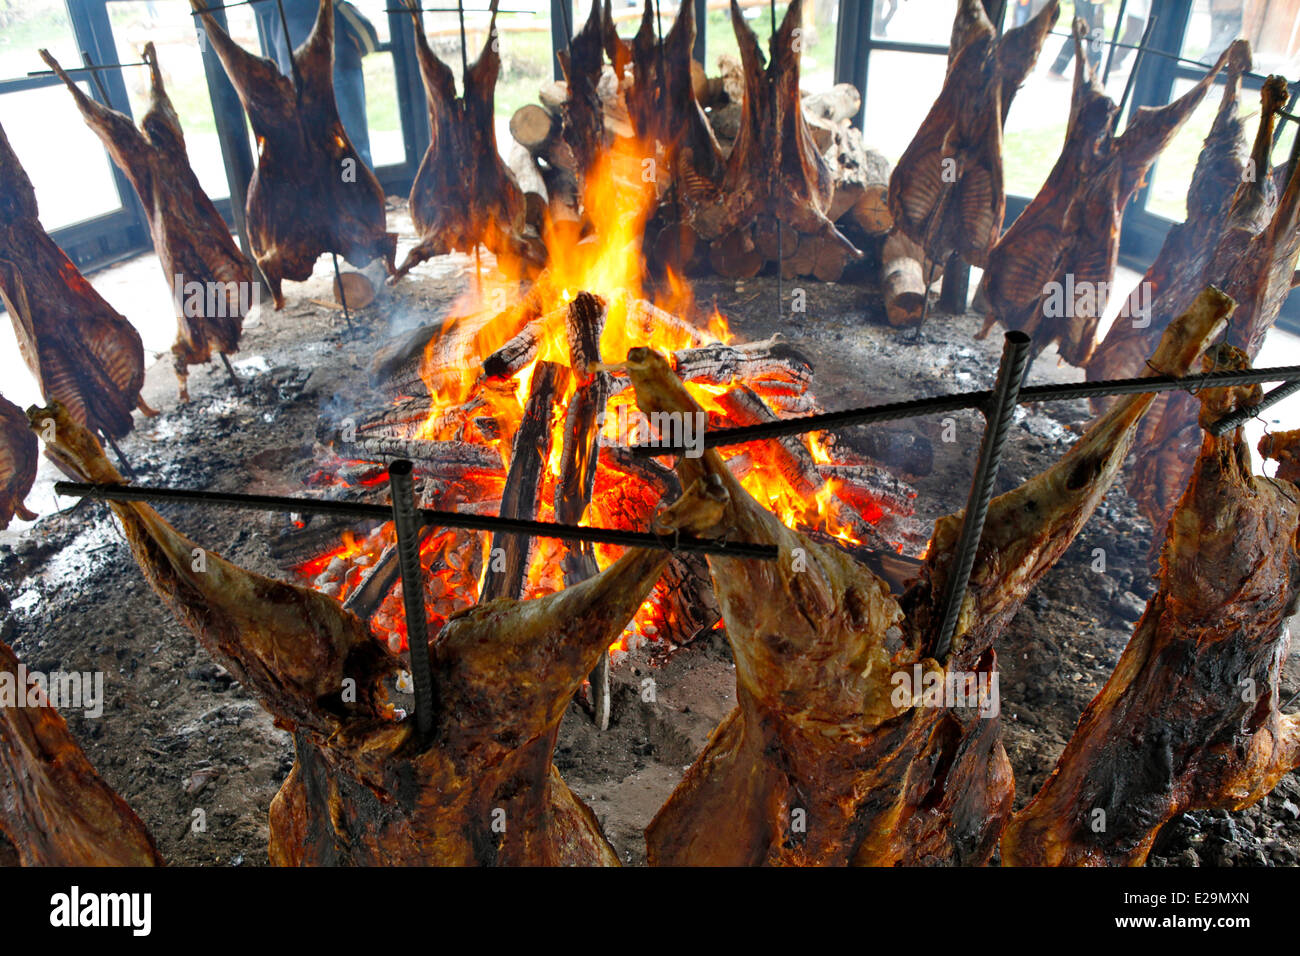 Argentina, Patagonia, Ushuaia, the national park, roasting sheeps in barbecue in a restaurant Stock Photo